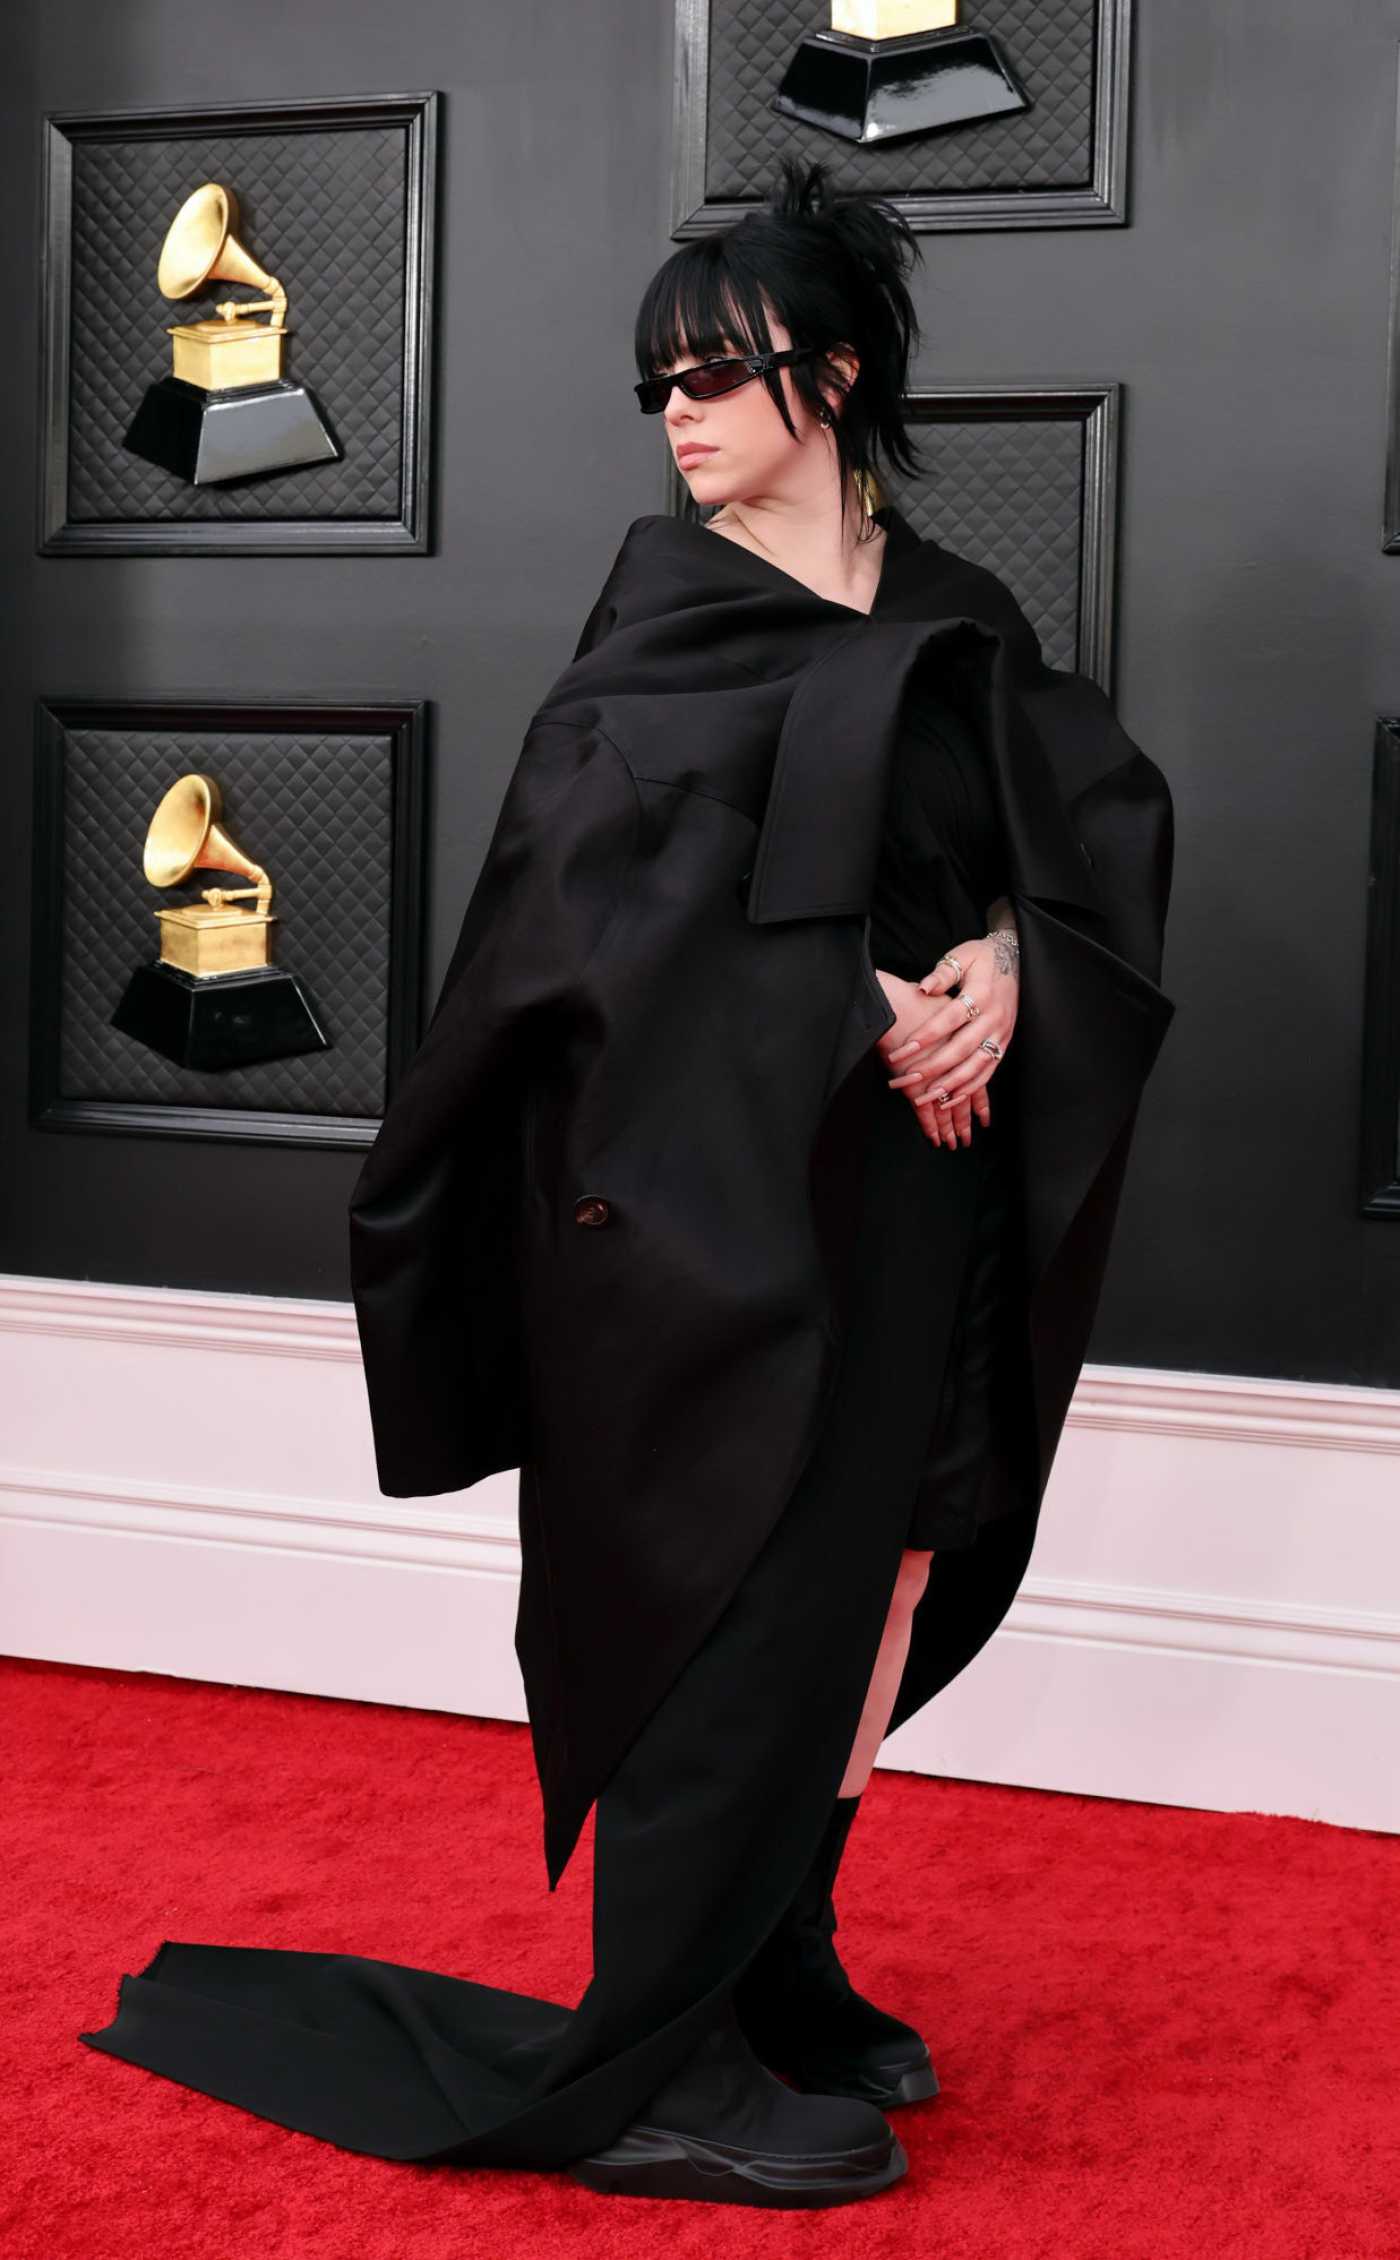 Billie Eilish Attends the 64th Annual Grammy Awards at the MGM Grand Garden Arena in Las Vegas 04/03/2022